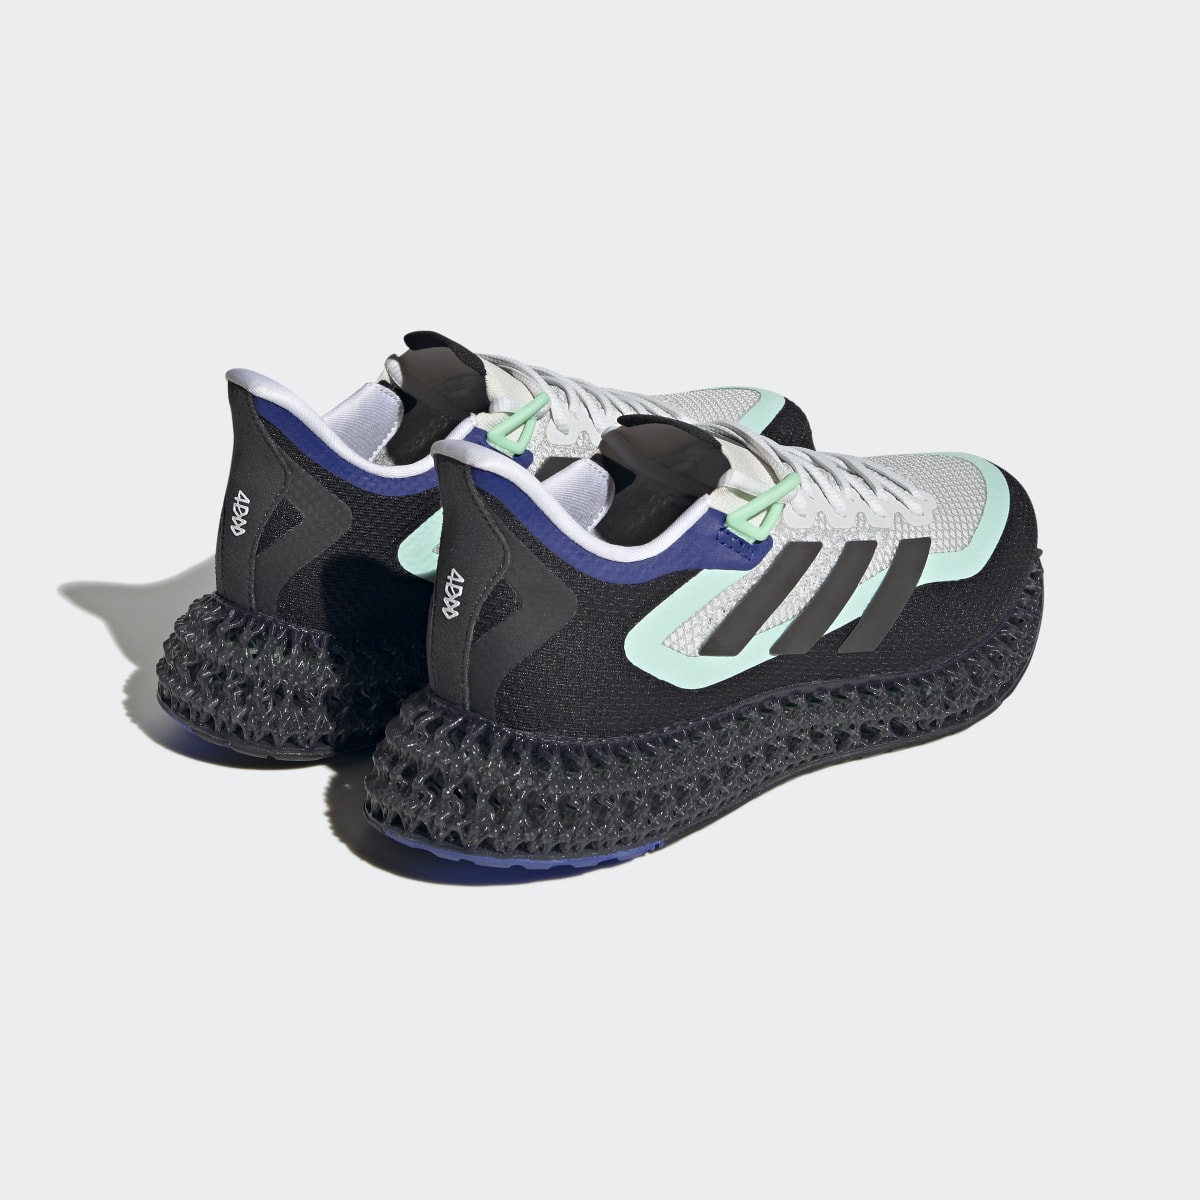 Adidas 4DFWD Running Shoes. 12